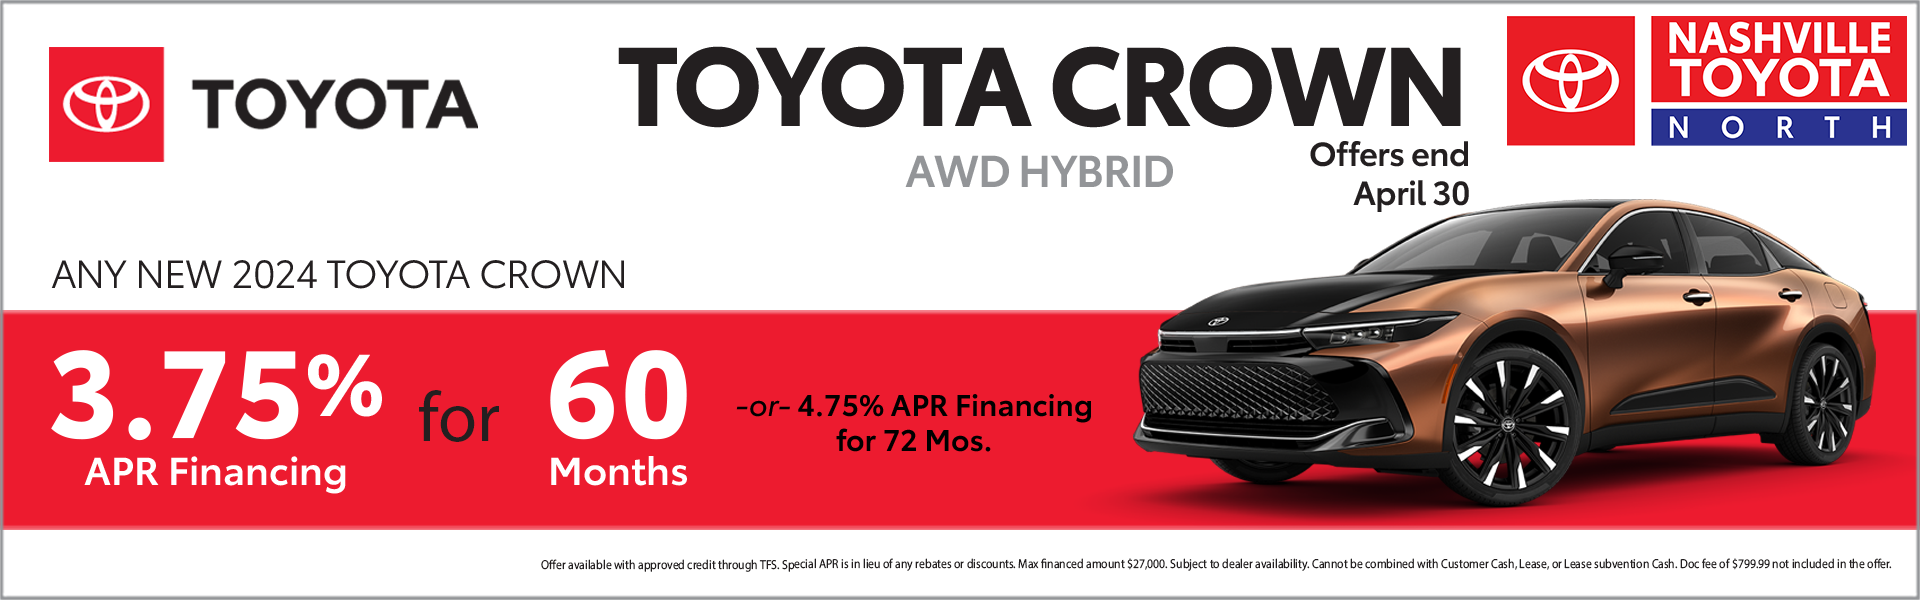 Nashville Toyota North April Offers on Toyota Crown